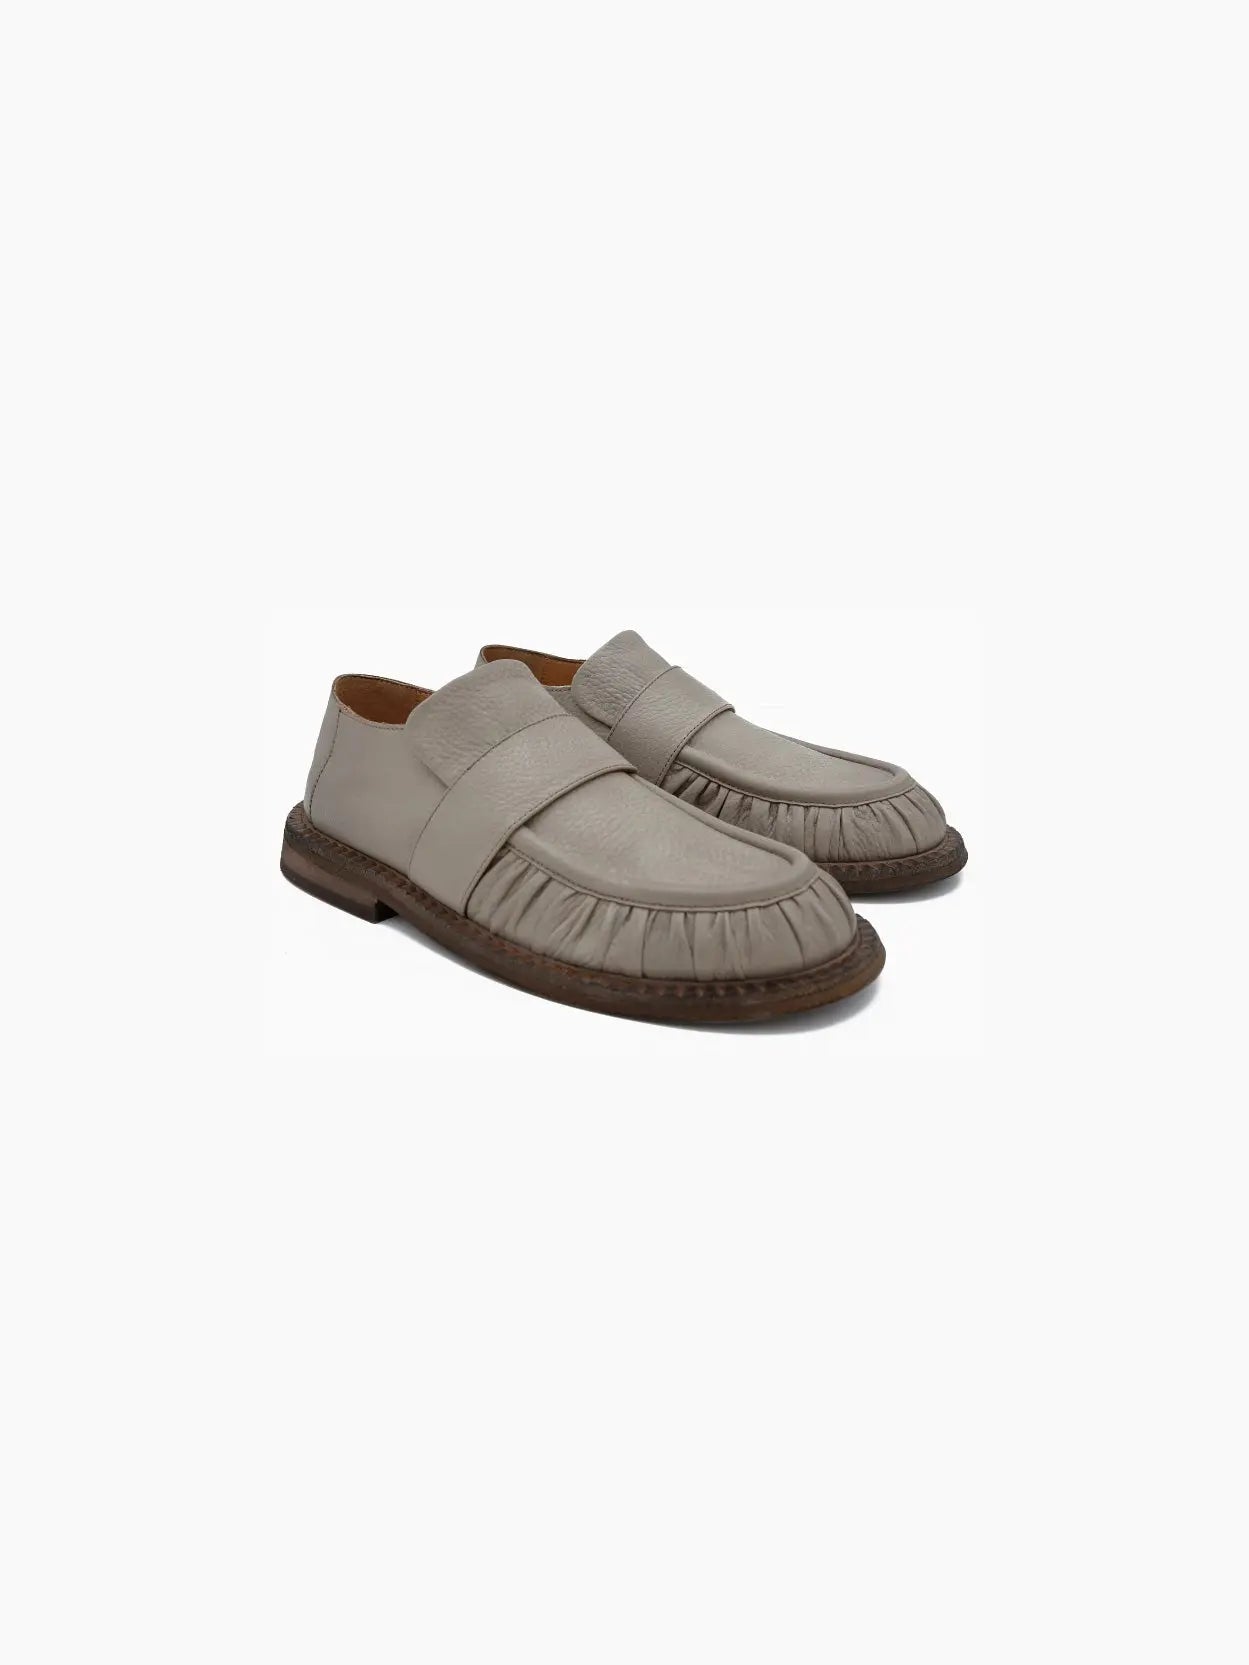 A single Alluce Loafer Clay by Marsèll, viewed from the side, available at Bassalstore in Barcelona, features a wide strap across the upper and a gathered detail along the toe area. The shoe has a low, dark brown sole with a slightly worn appearance.